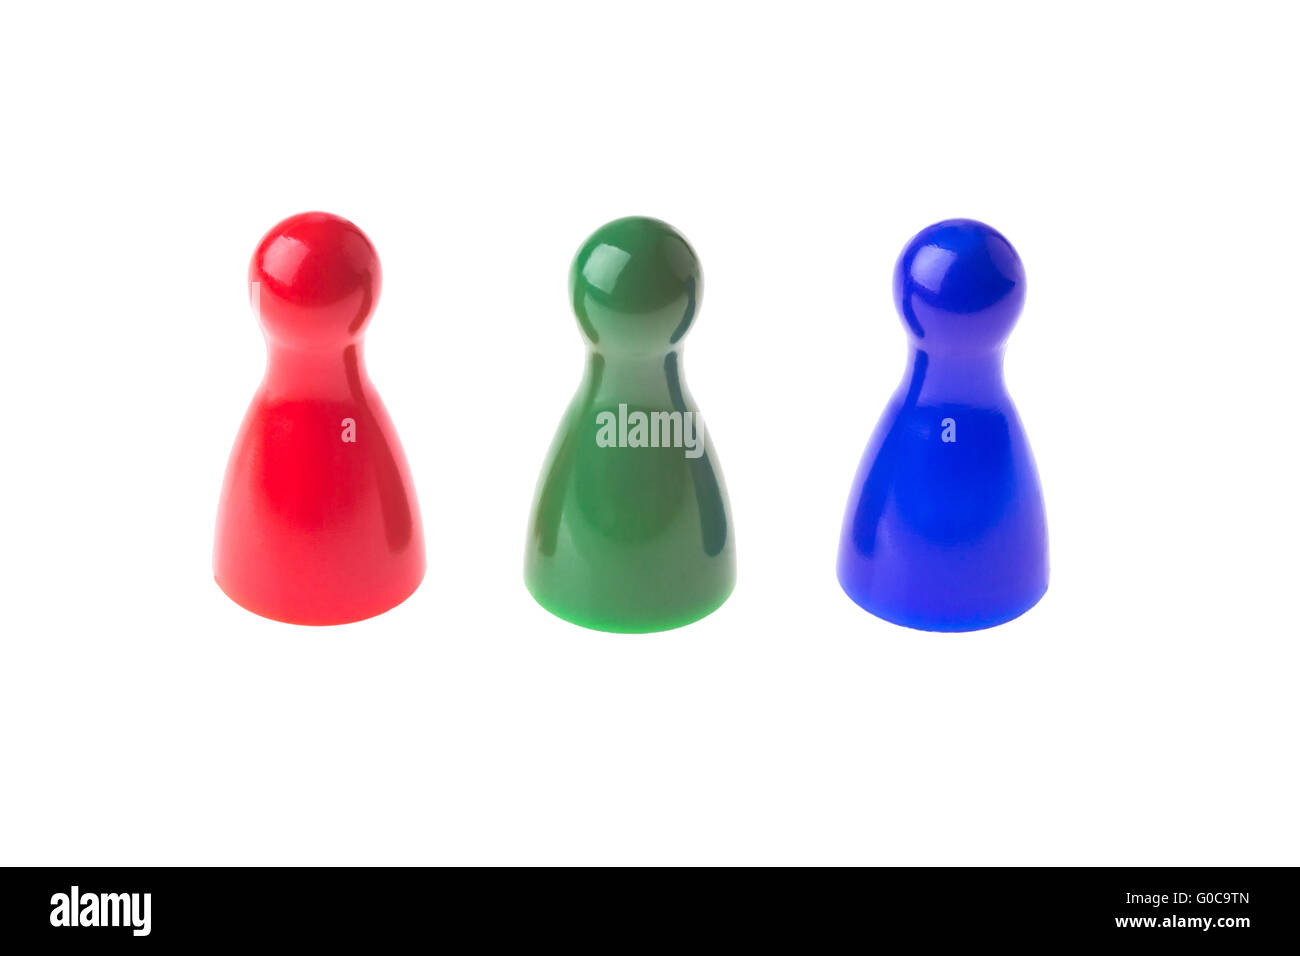 Three game pawns in a row in different colors Stock Photo